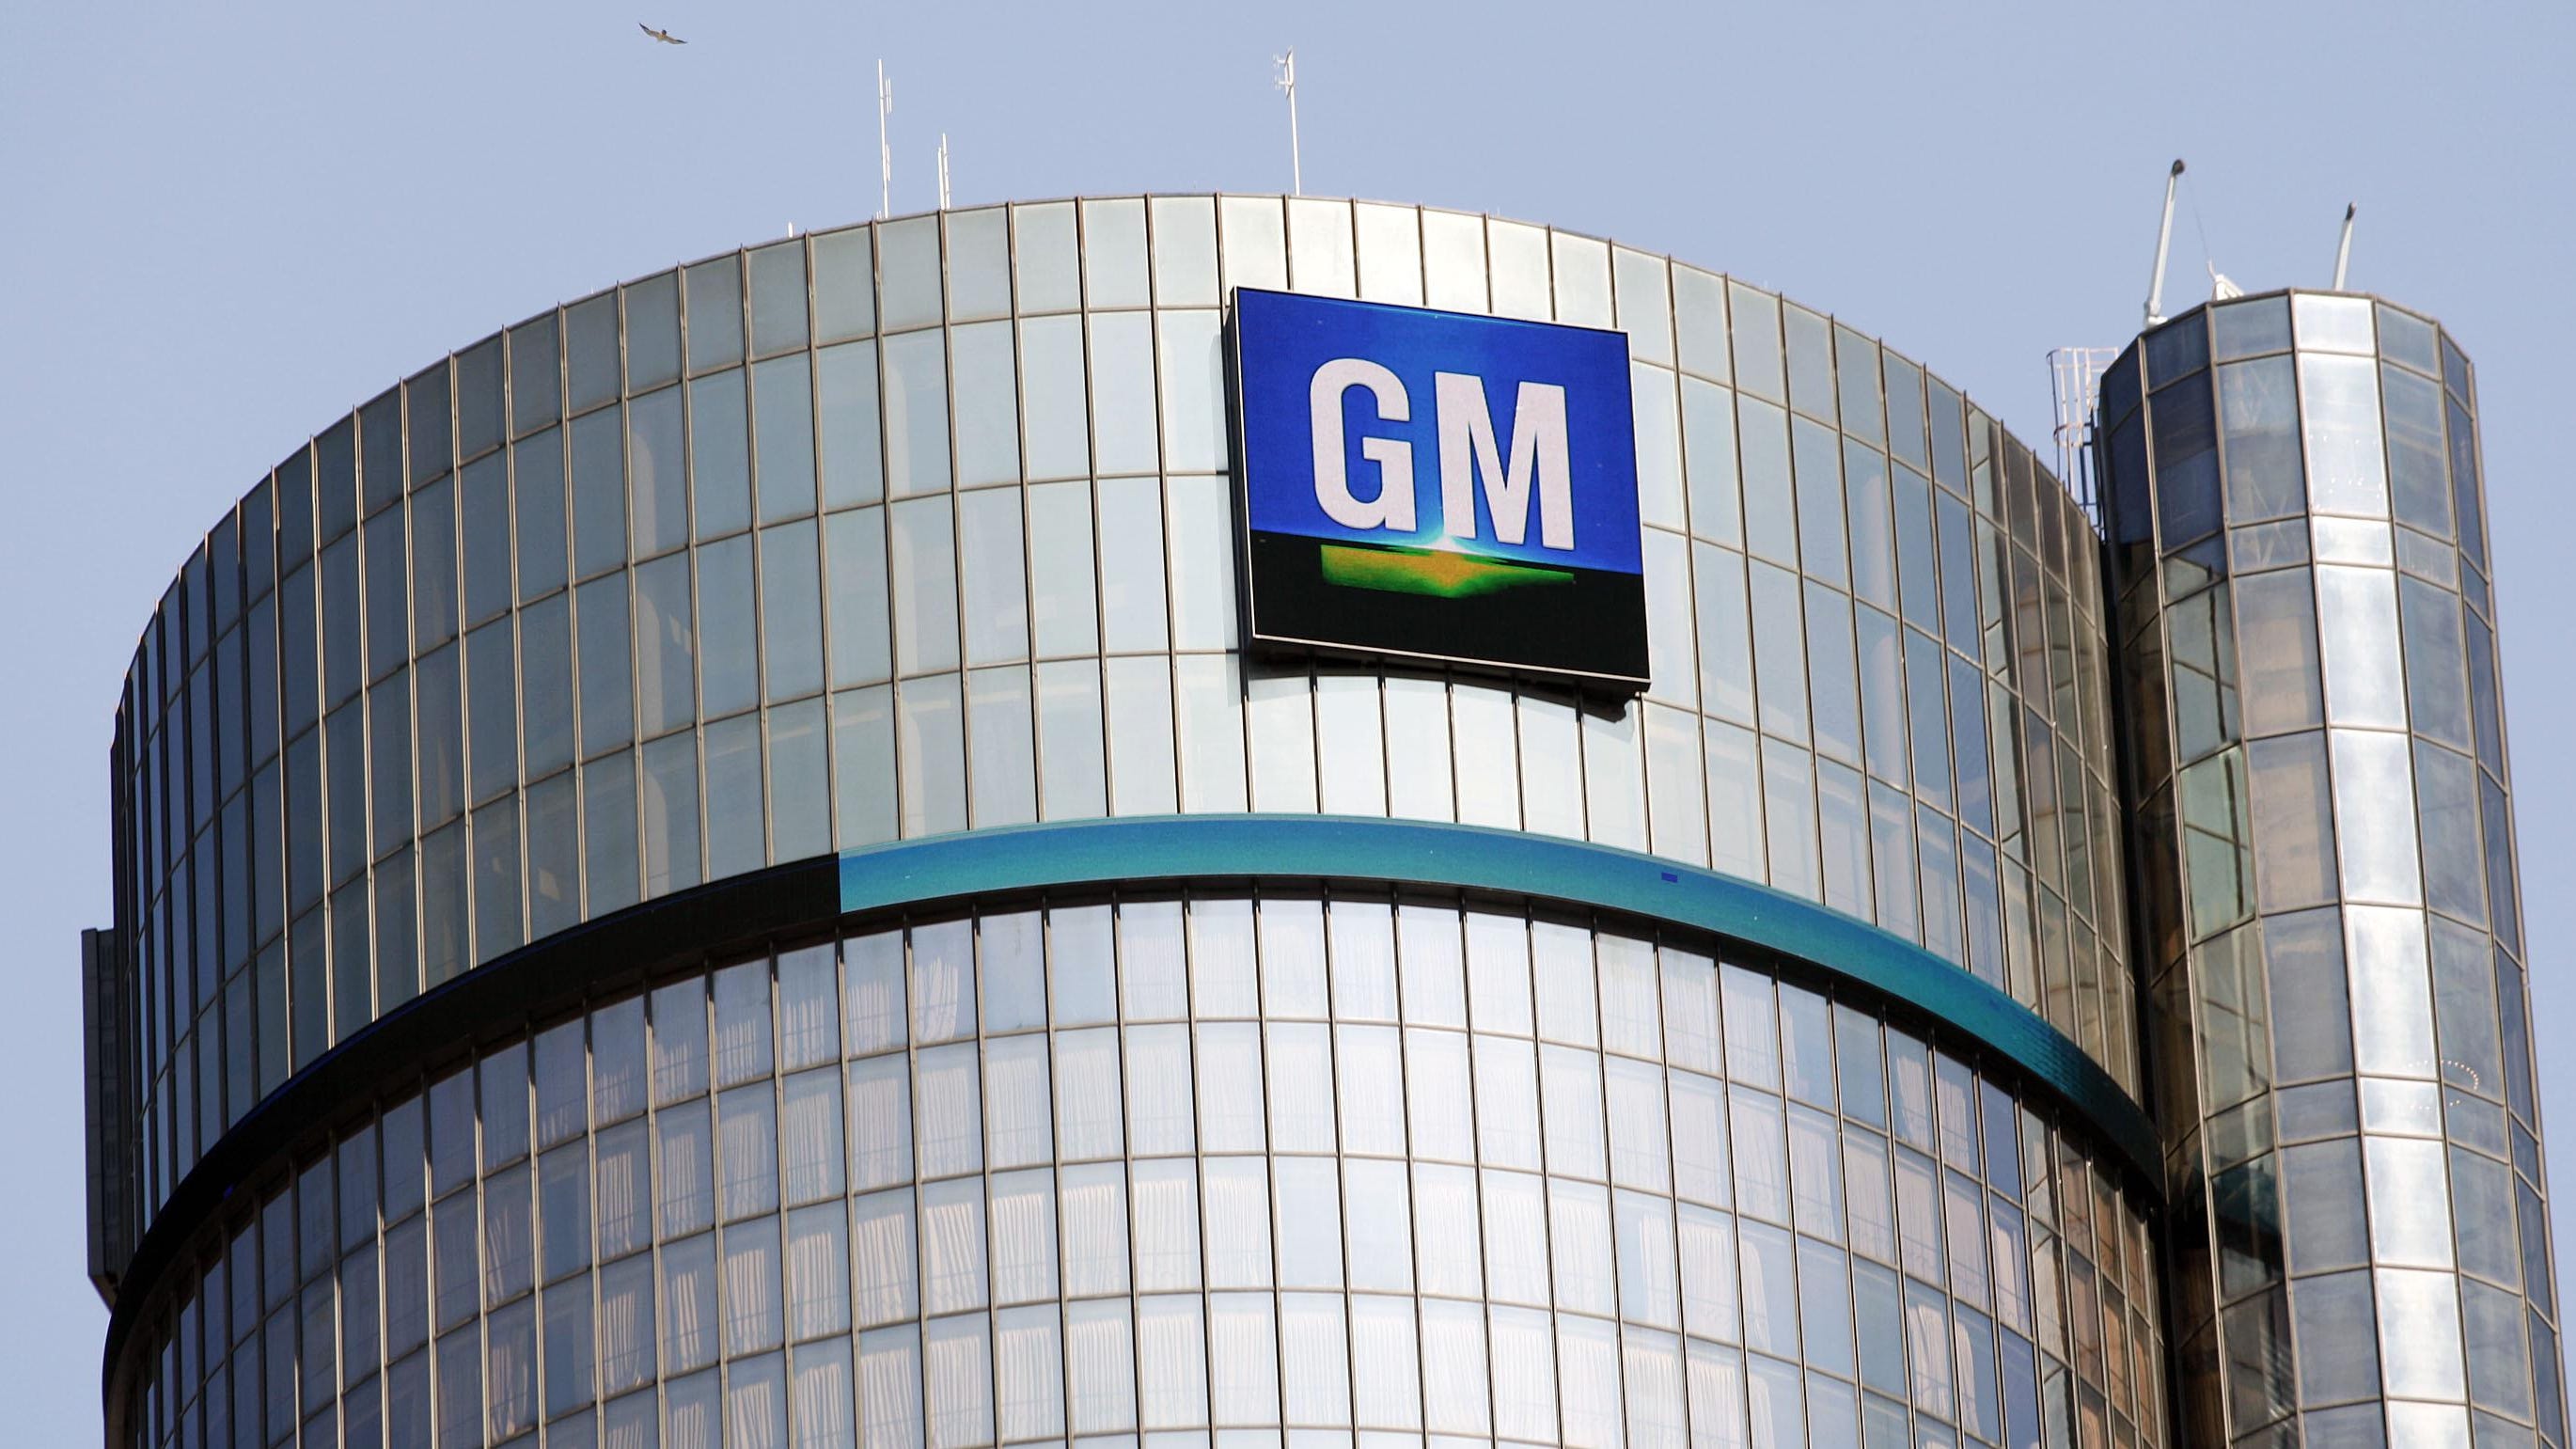 GM logo on the world headquarters building.